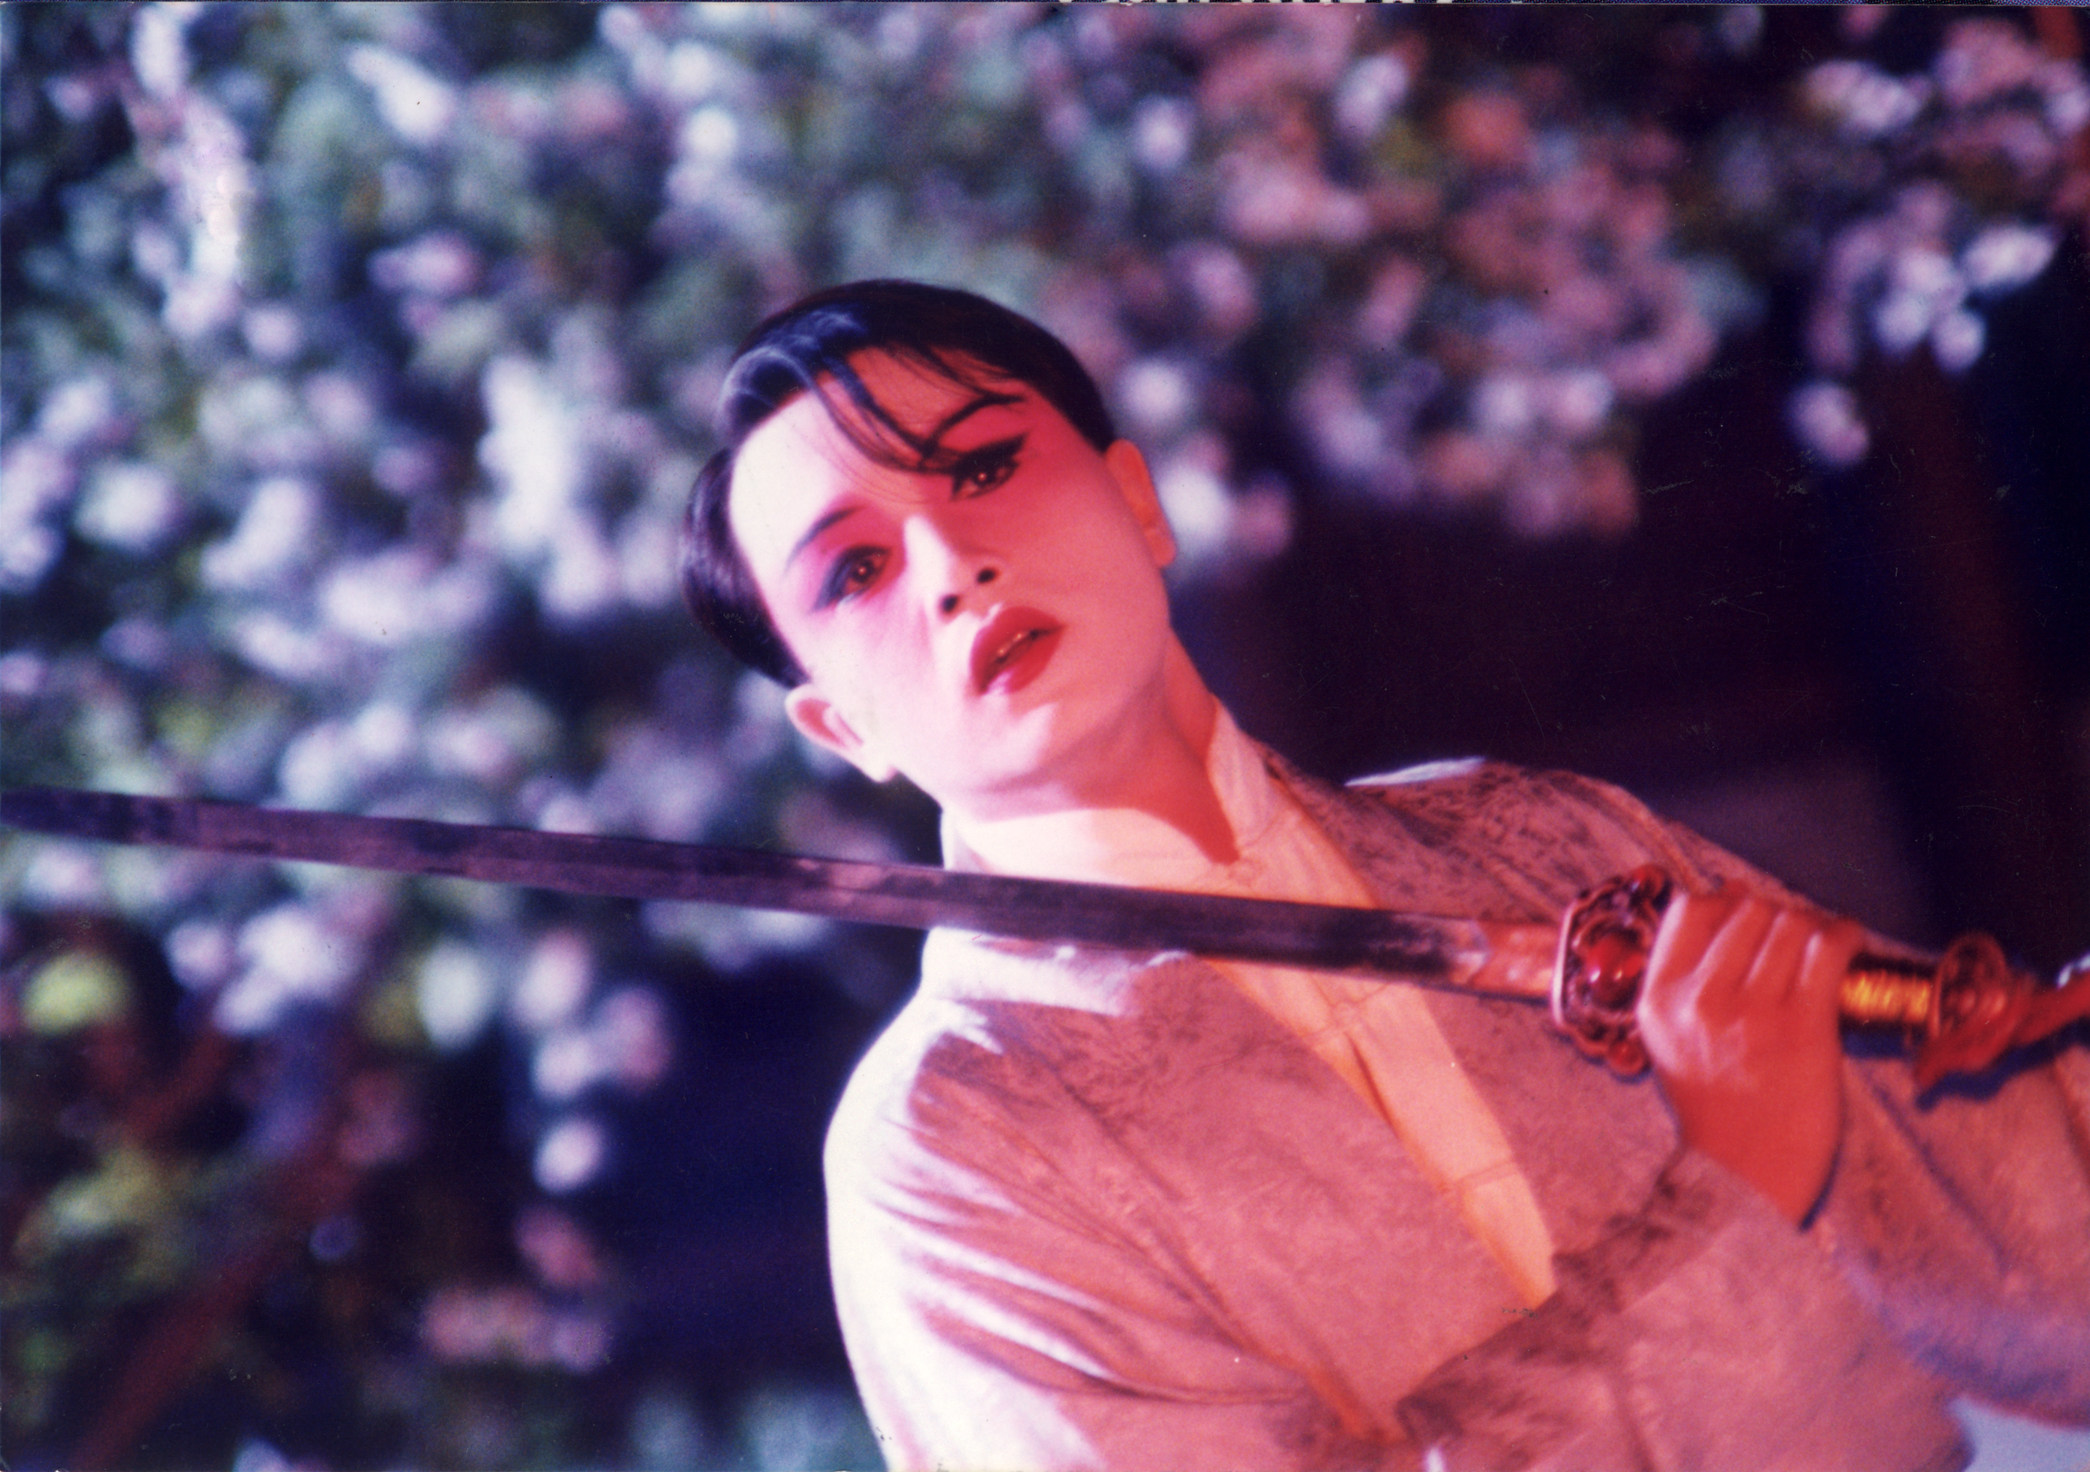 Leslie Cheung in a still from the movie “Farewell My Concubine” (1993). Photo: Beijing Film Studio